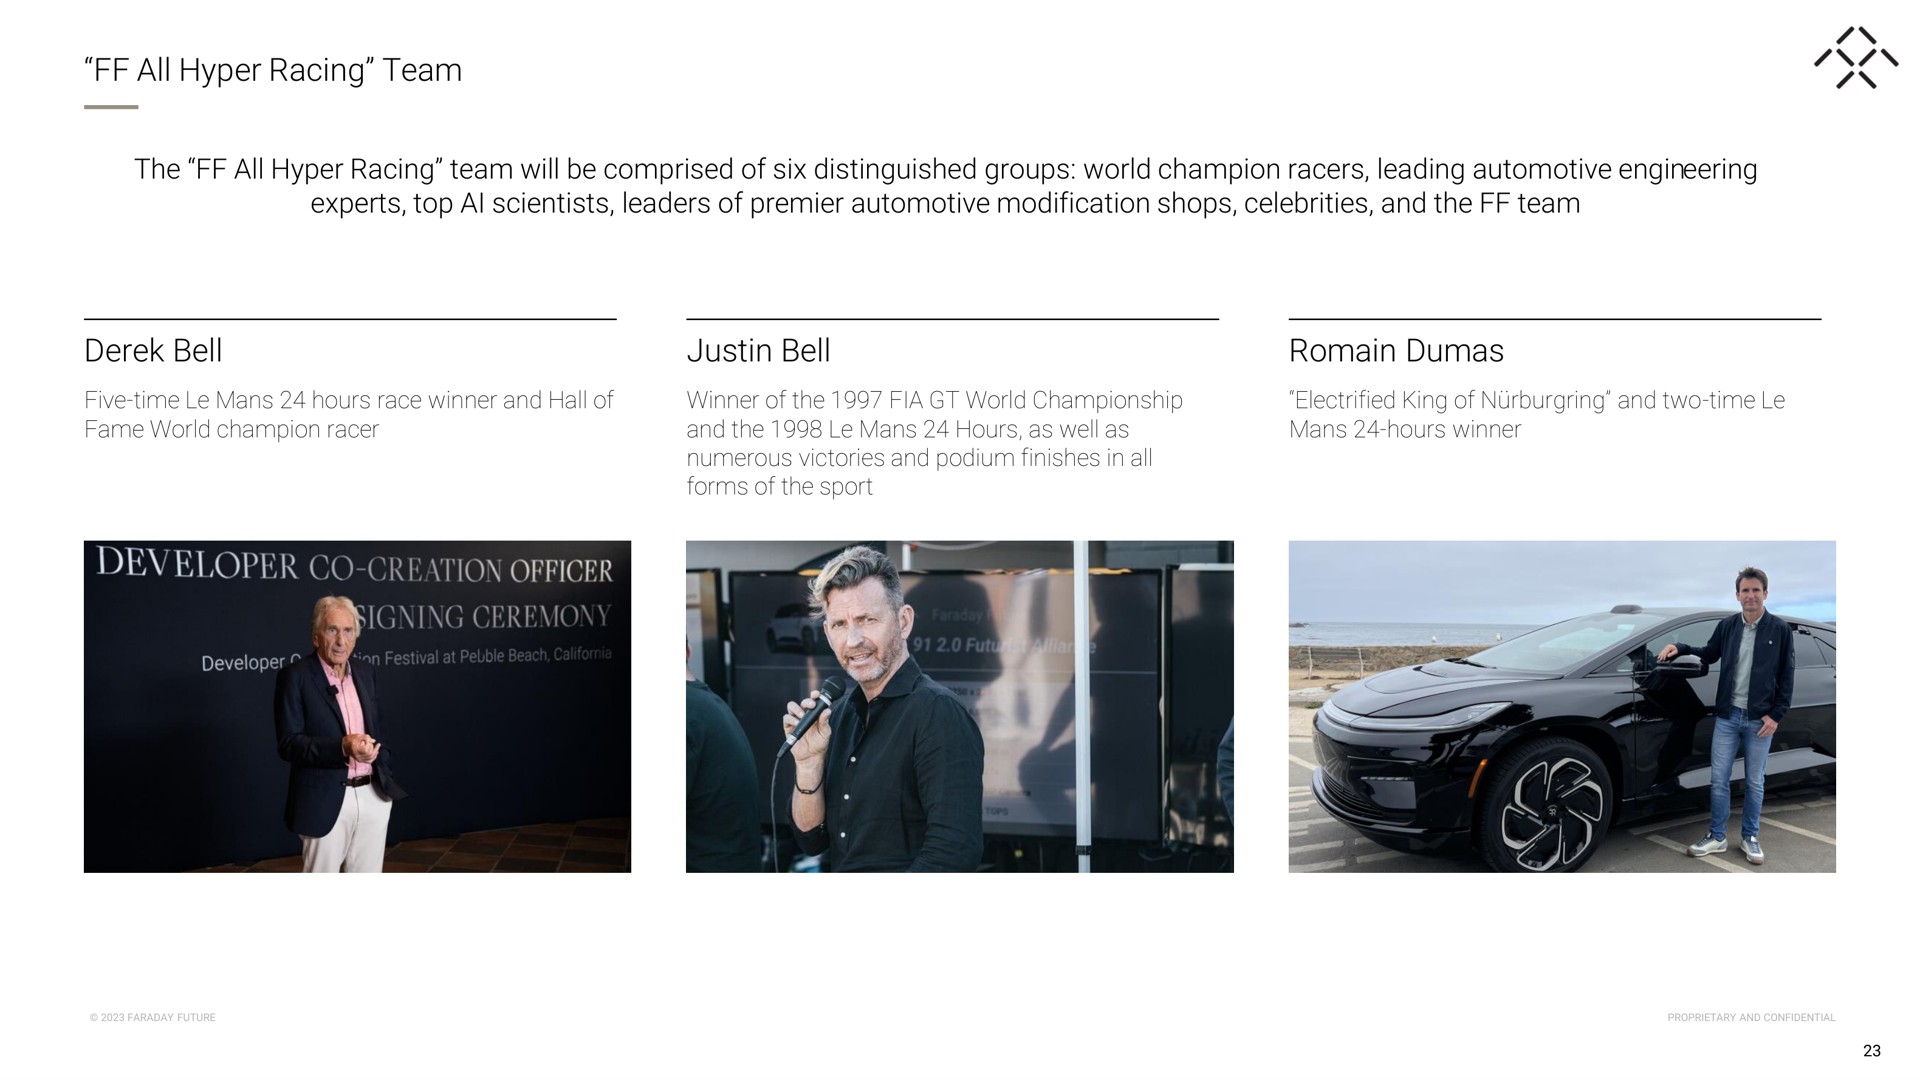 all hyper racing team the all hyper racing team will be comprised of six distinguished groups world champion racers leading automotive engineering experts top scientists leaders of premier automotive modification shops celebrities and the team bell bell dumas developer creation officer | Faraday Future